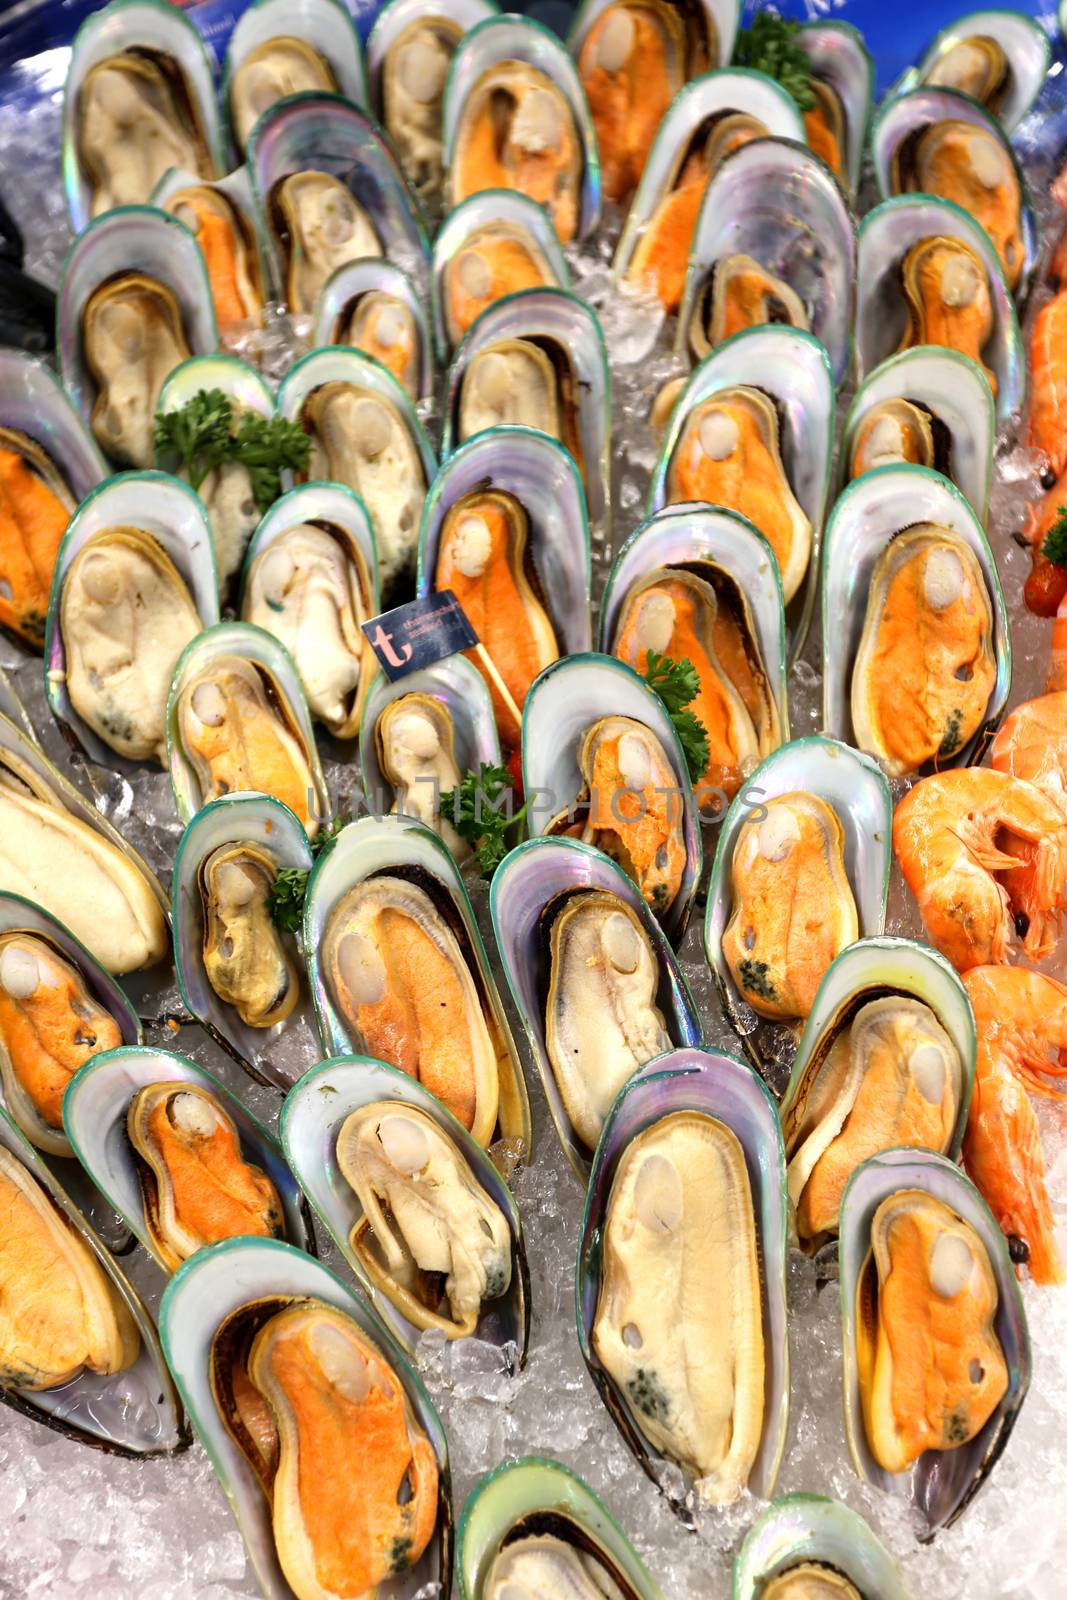 Mussels in shells by kostin77